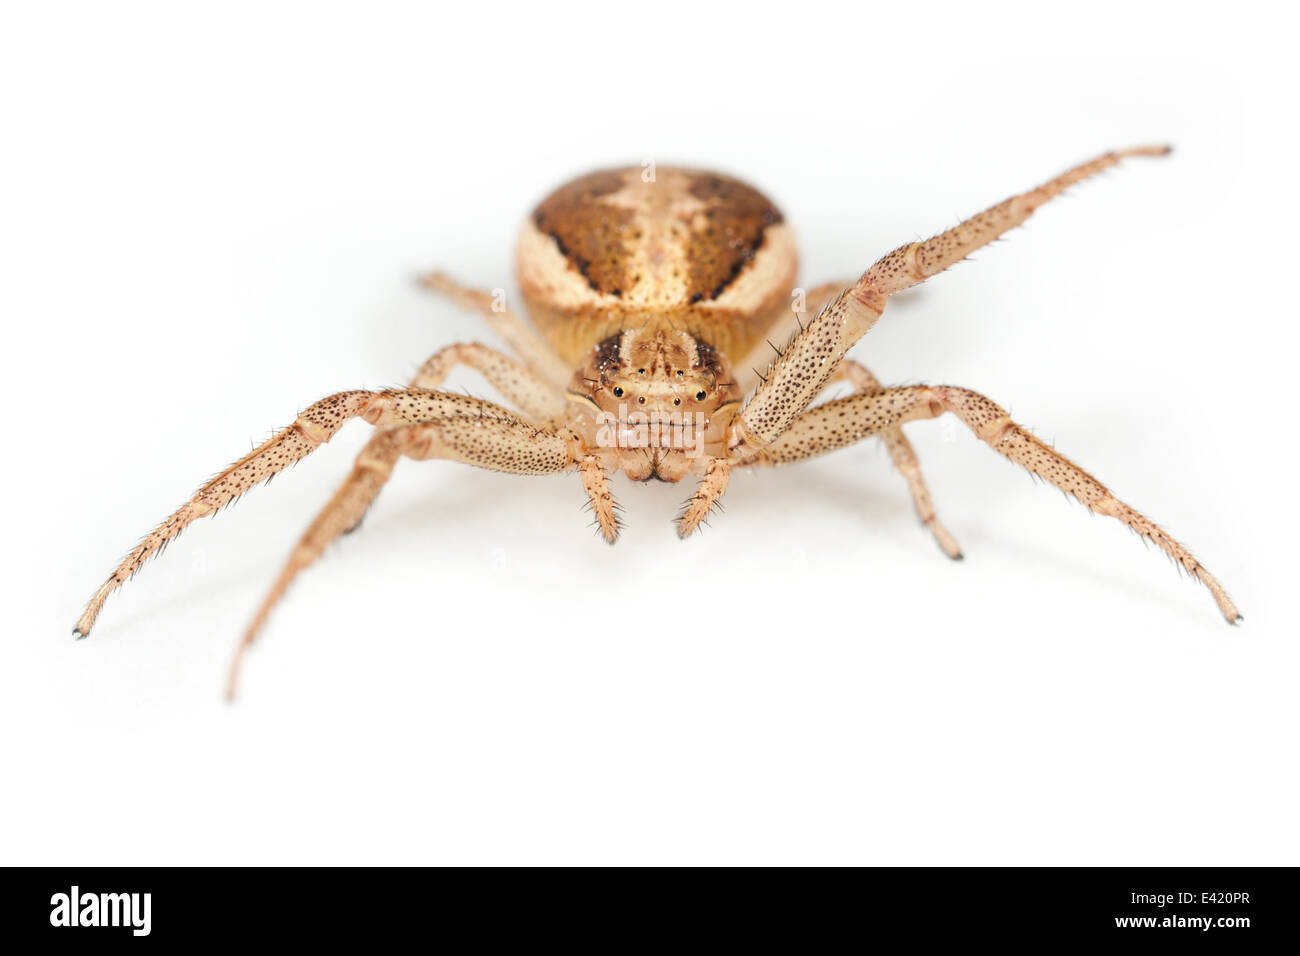 Female Xysticus ulmi spider, part of the family Thomisidae - Crab spiders. Isolated on white background. Stock Photo